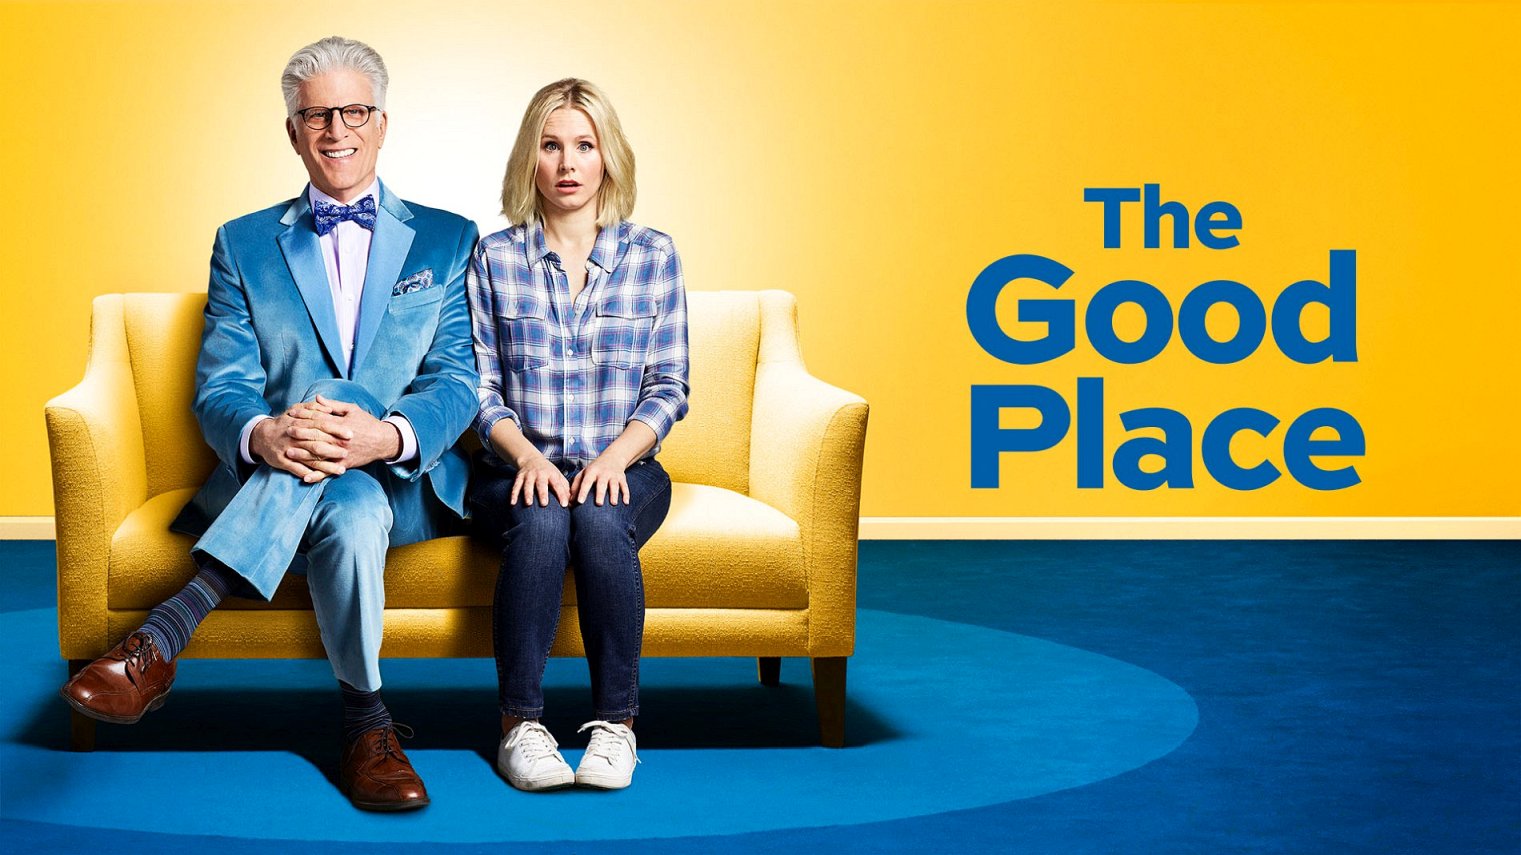 cast of The Good Place season 1